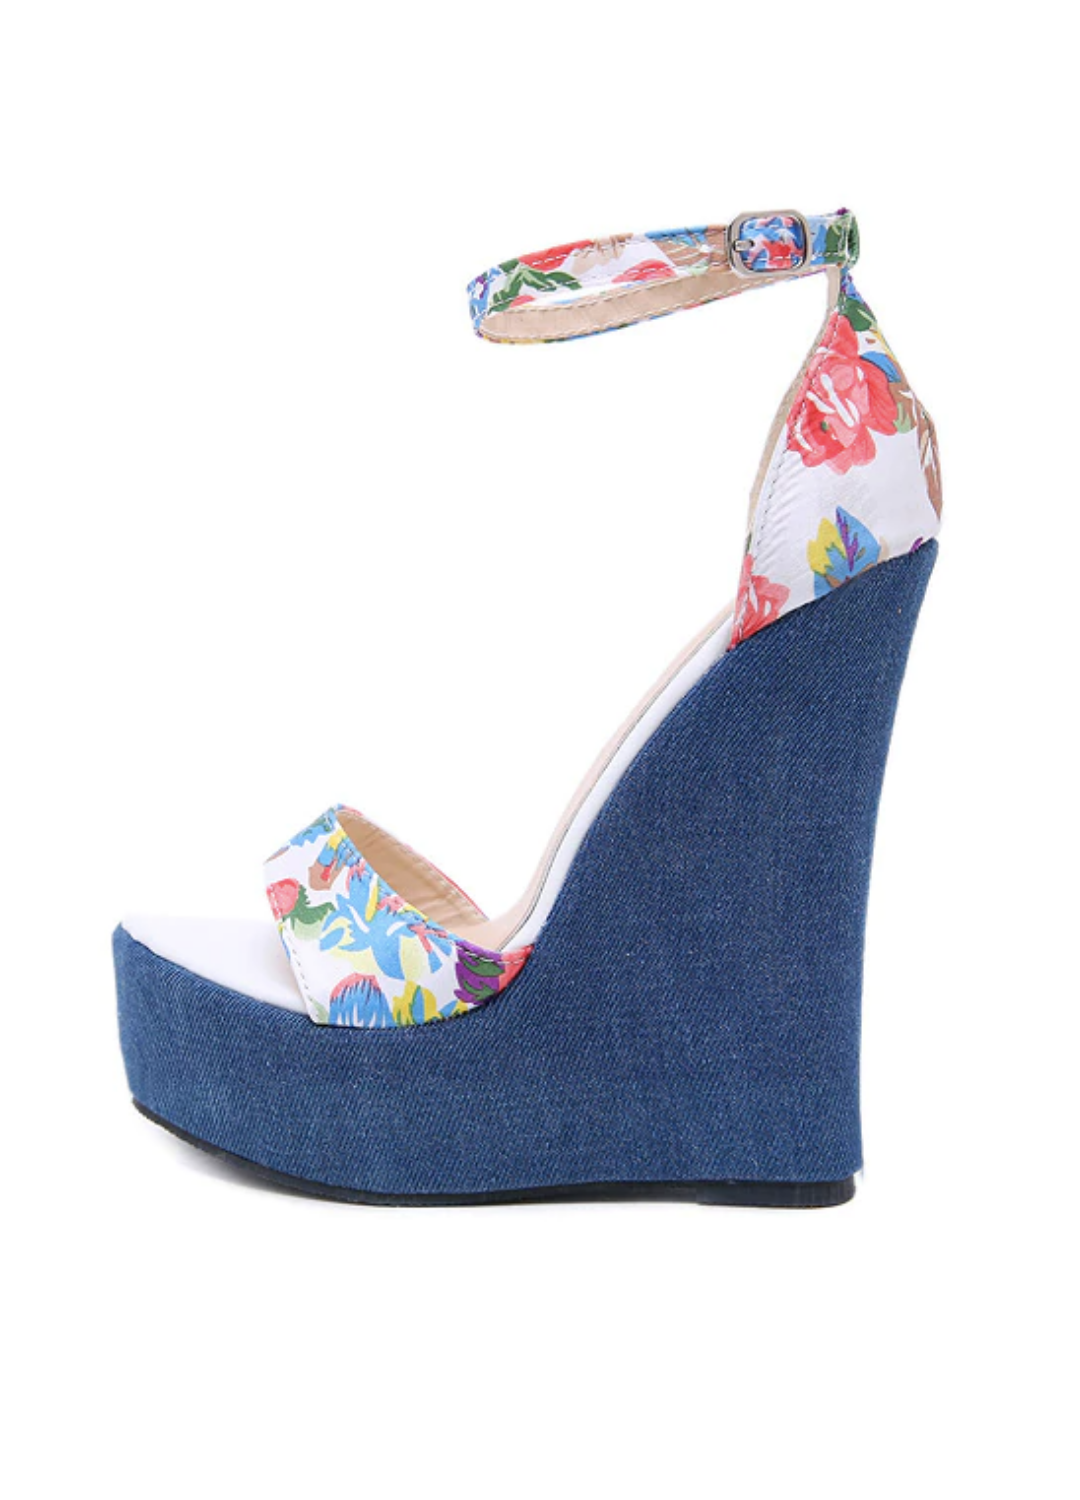 Cynthia Women's Wedges | Ultrasellershoes.com – Ultra Seller Shoes